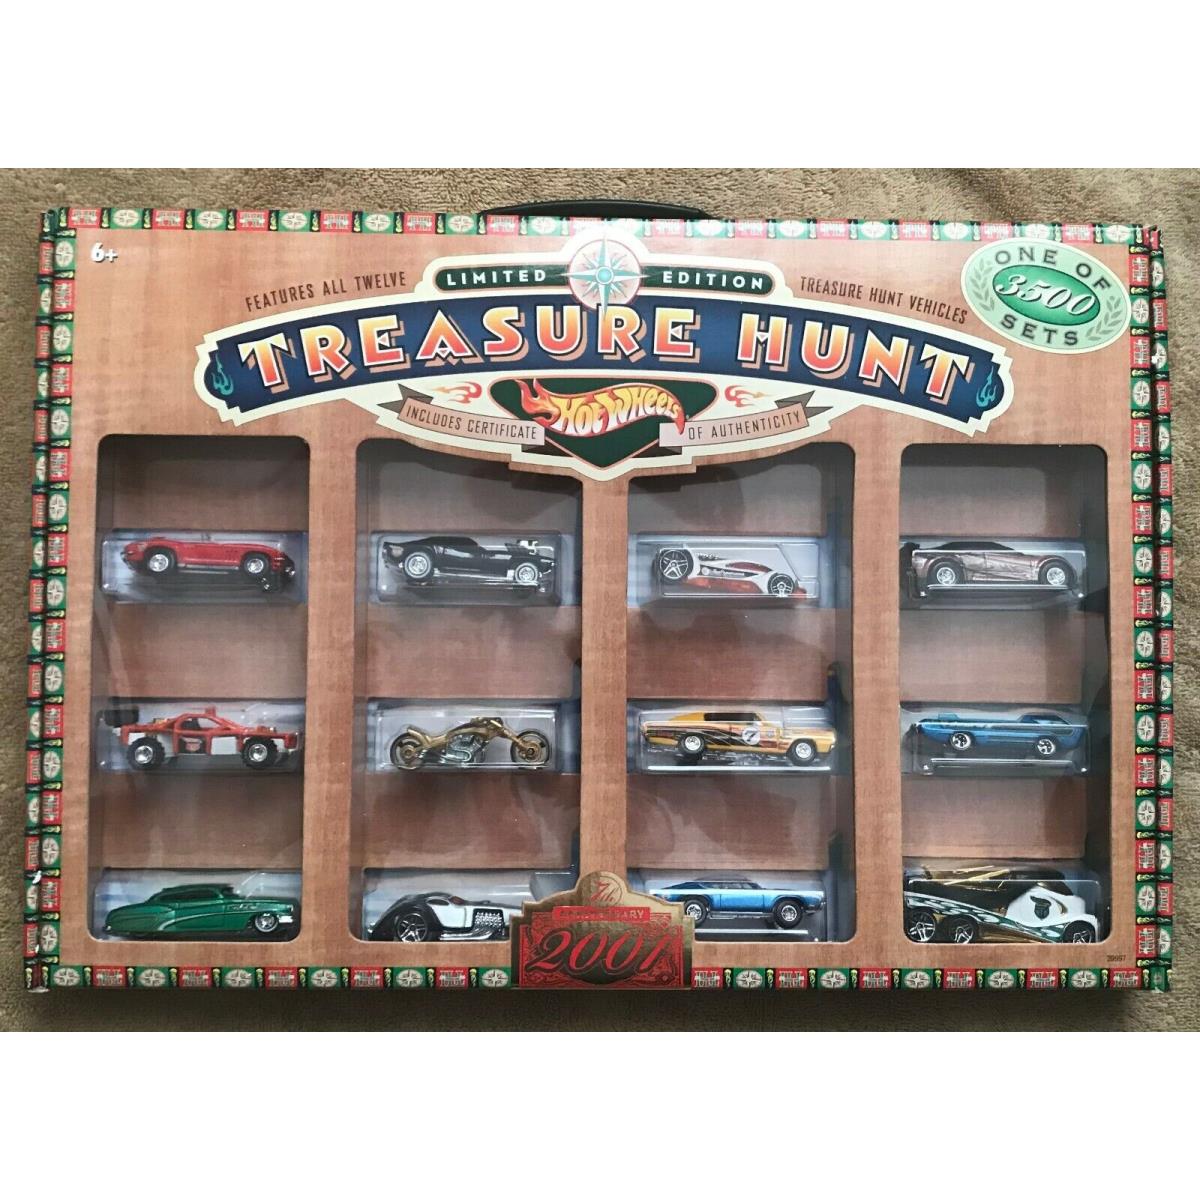 2001 Hot Wheels J.c. Penney Treasure Hunt Set Of 12 Limited Edition 1 Of 3500